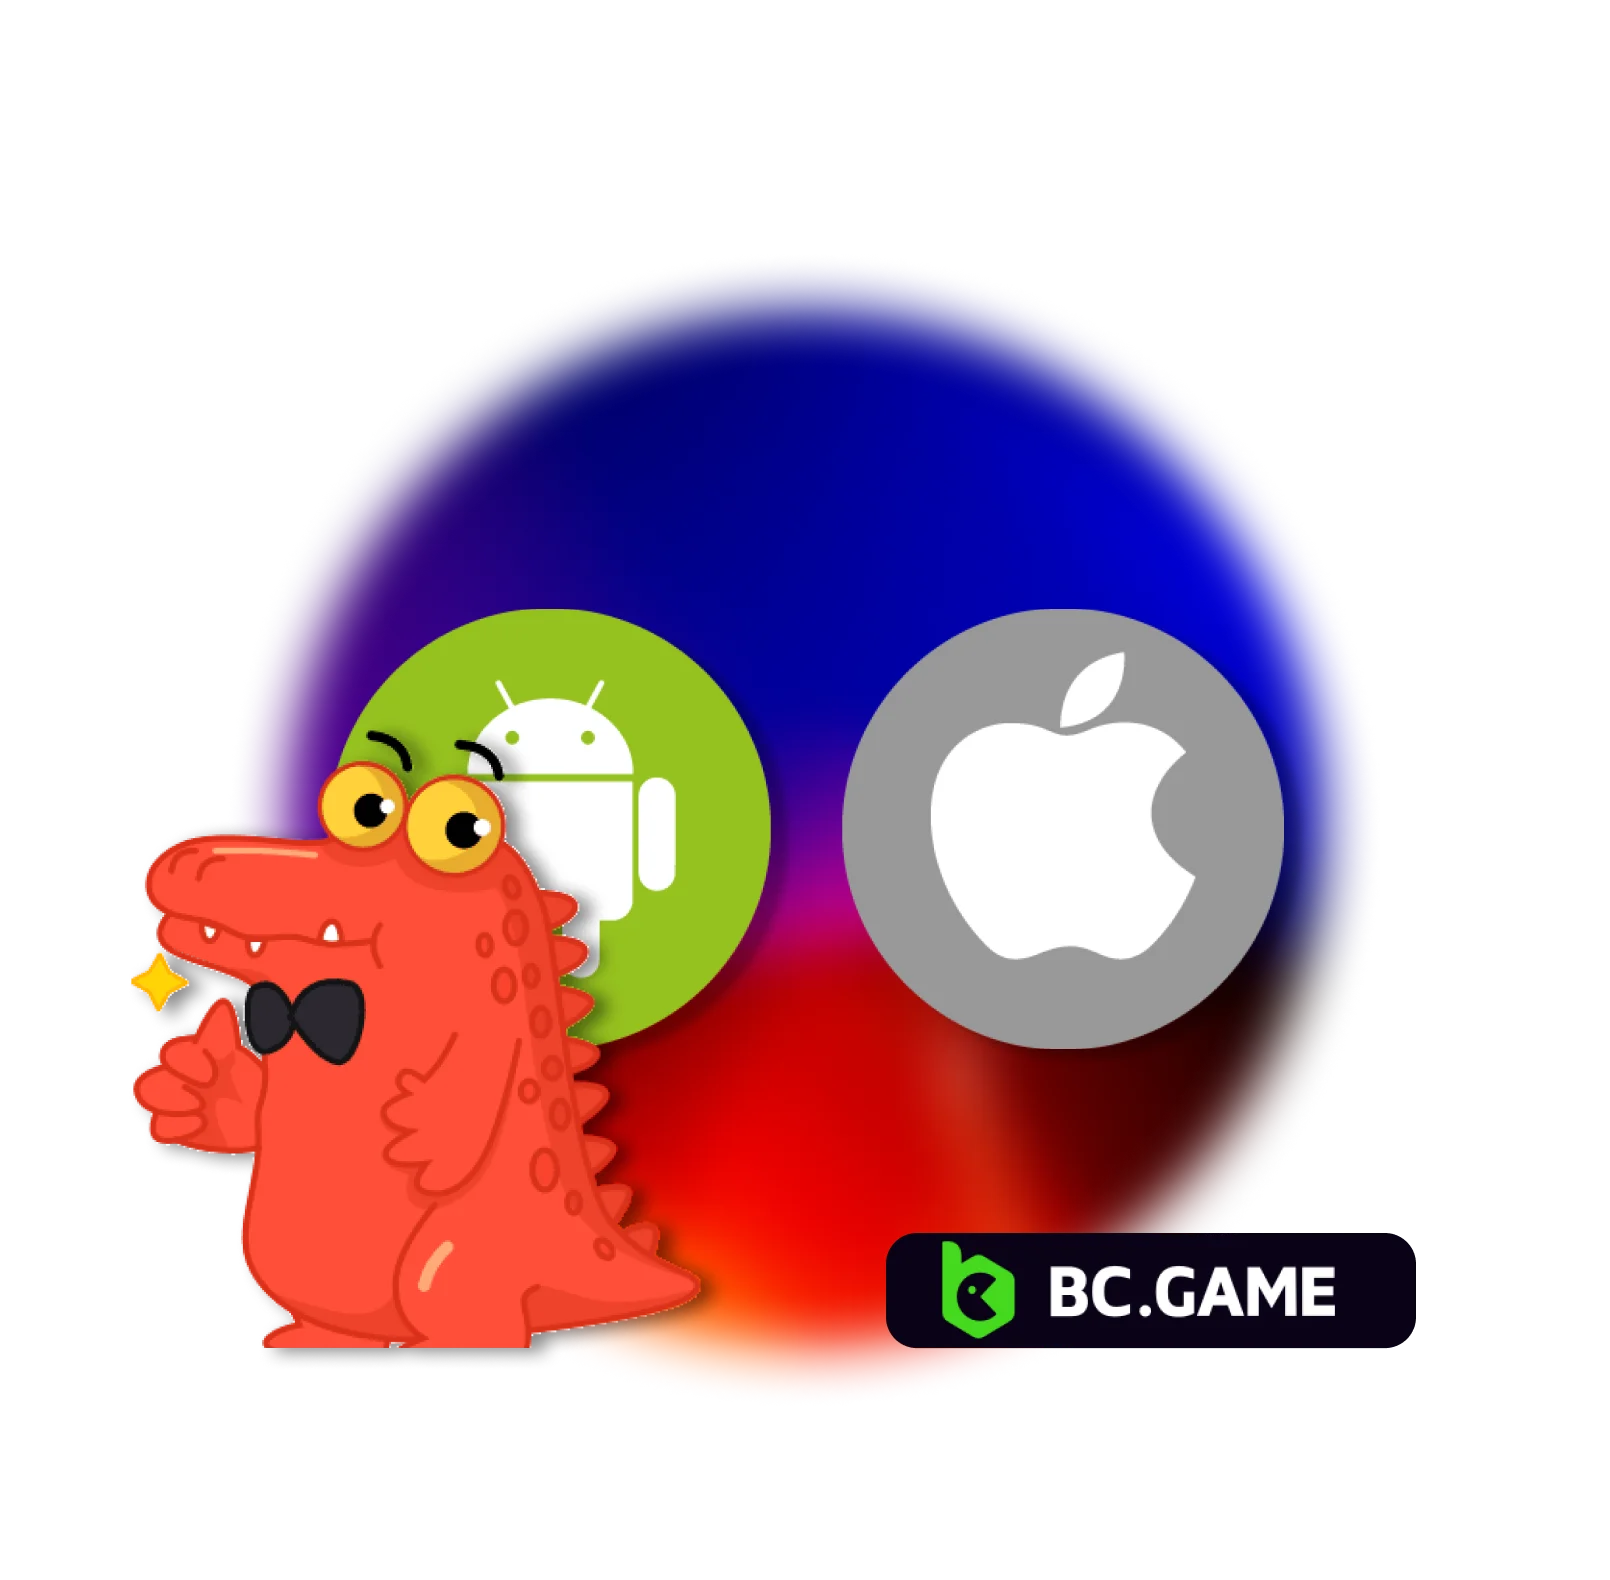 Learn how to install and use BC.Game app